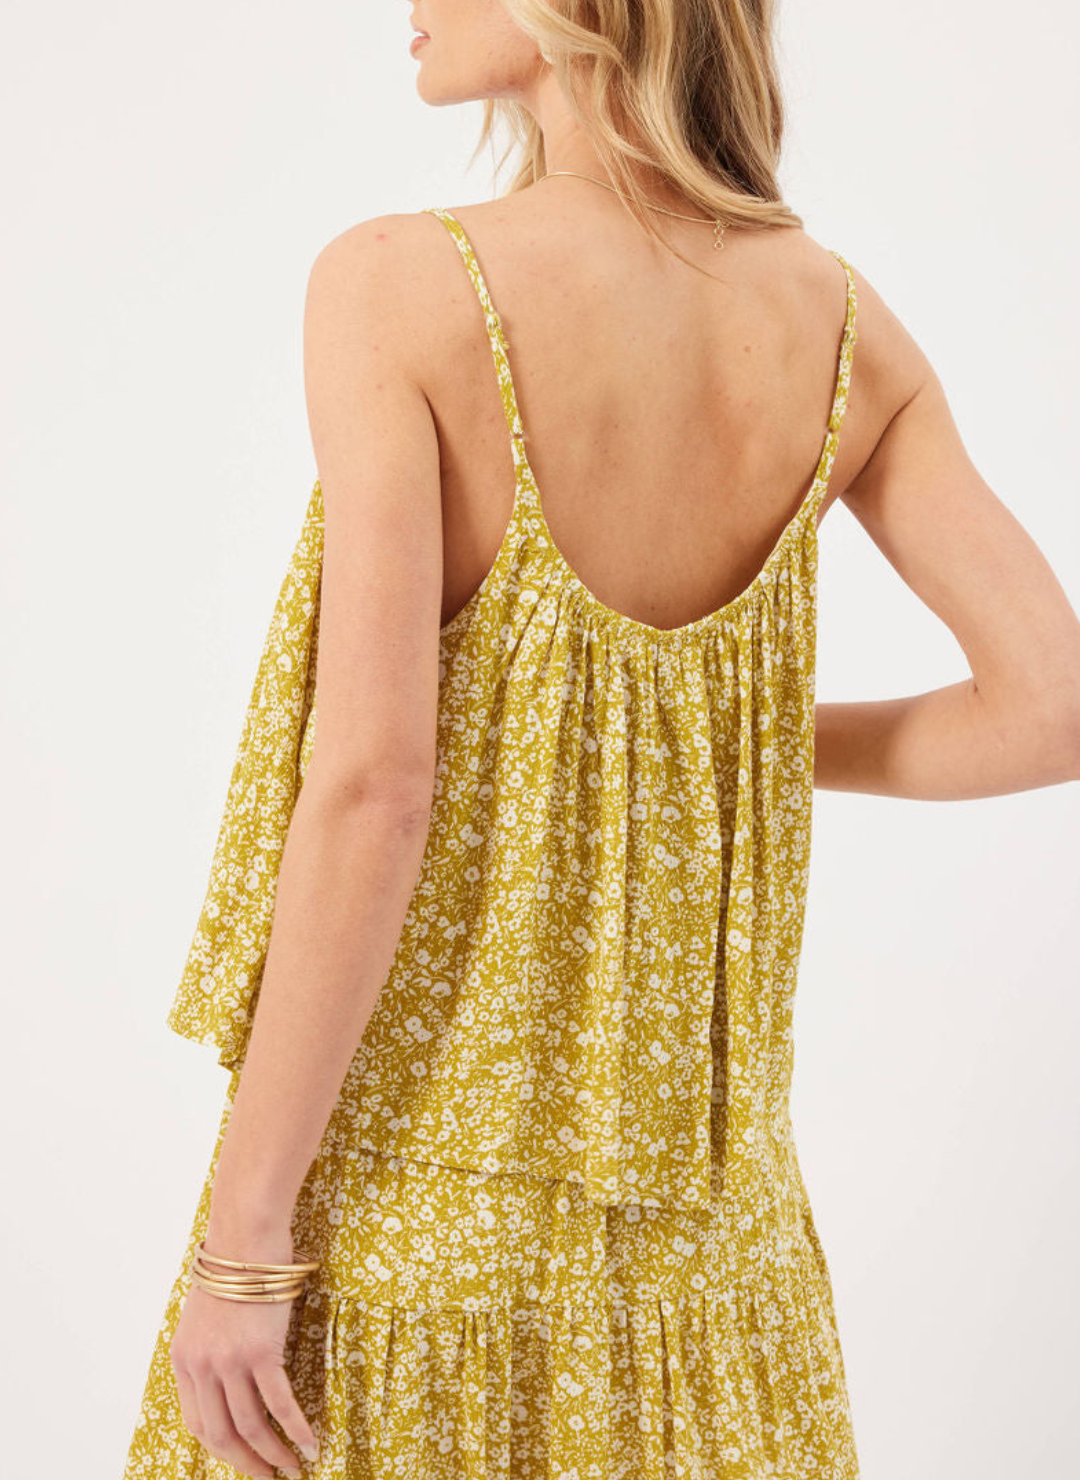 Back view of model wearing Finley Floral Tank with ditsy white floral detailing, curved neckline, and adjustable straps.